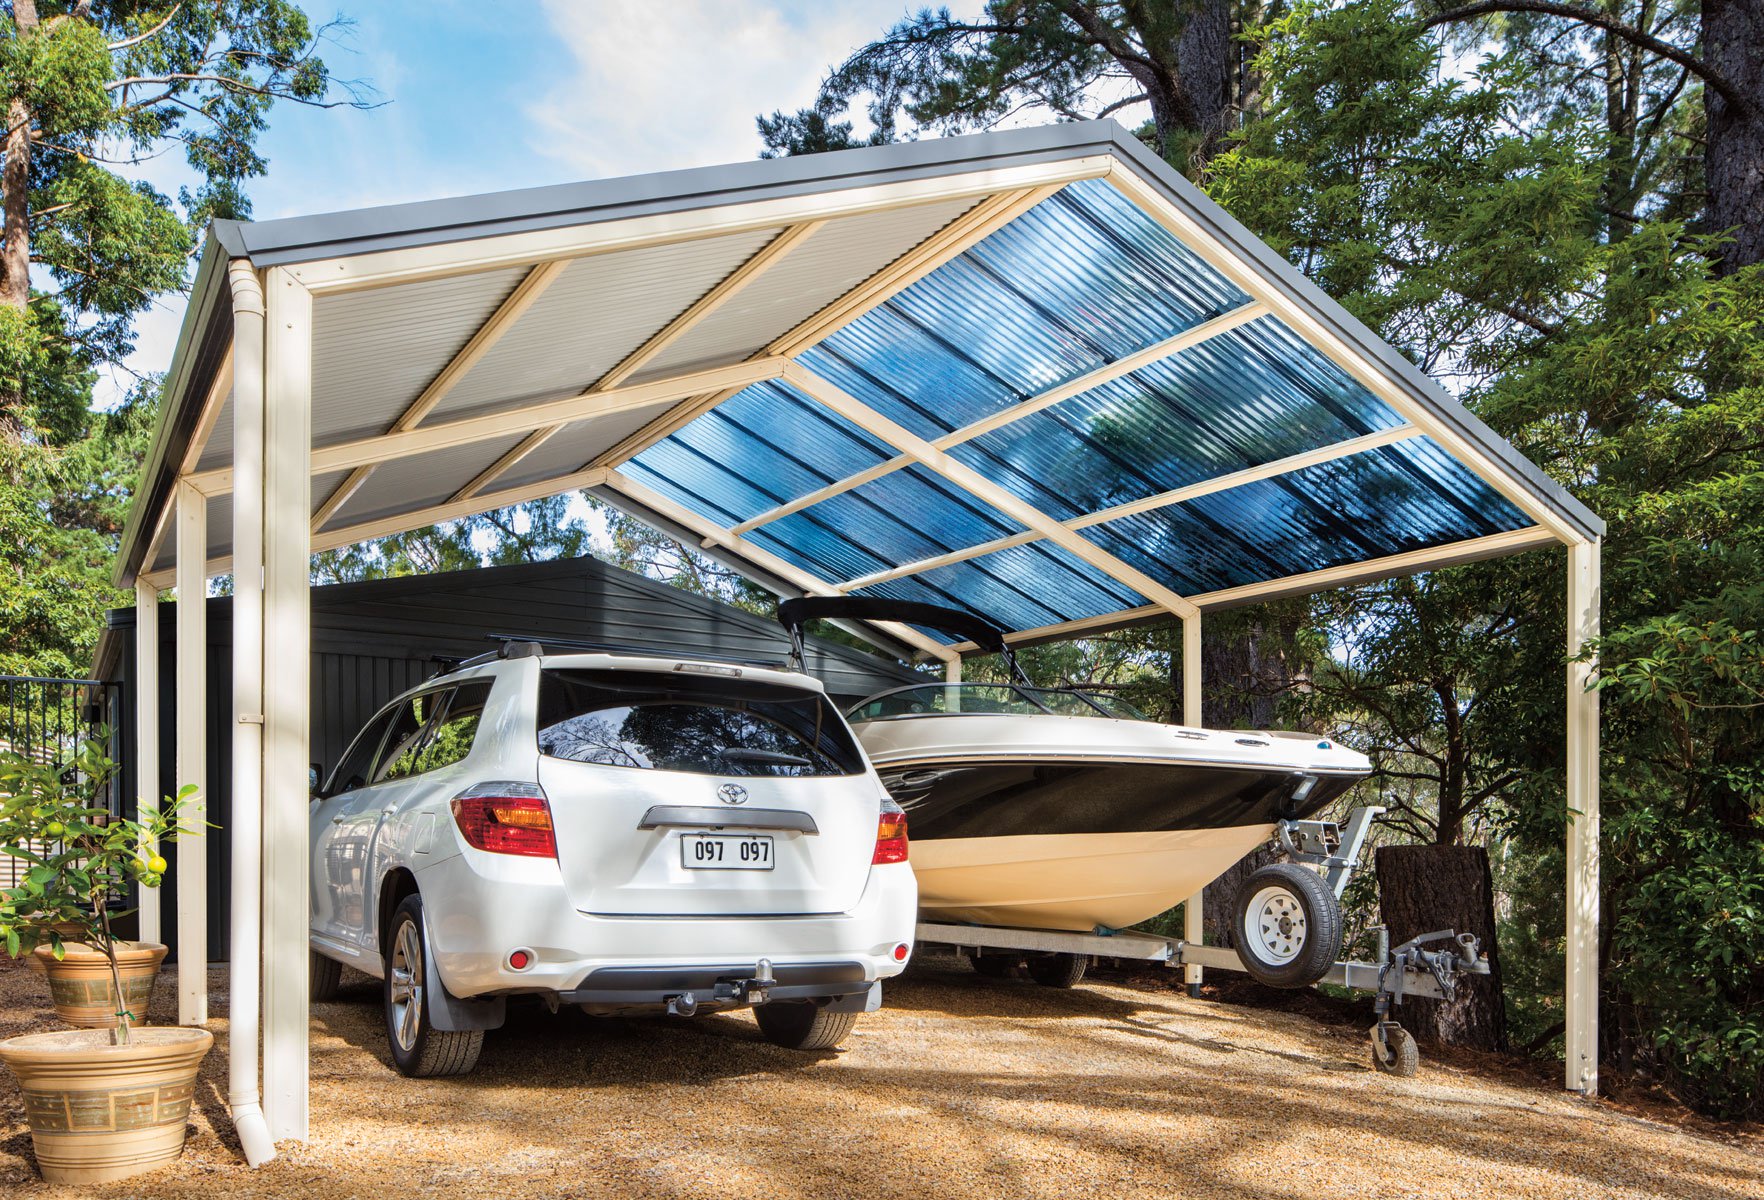 What are the costs associated with garage and carport installations?